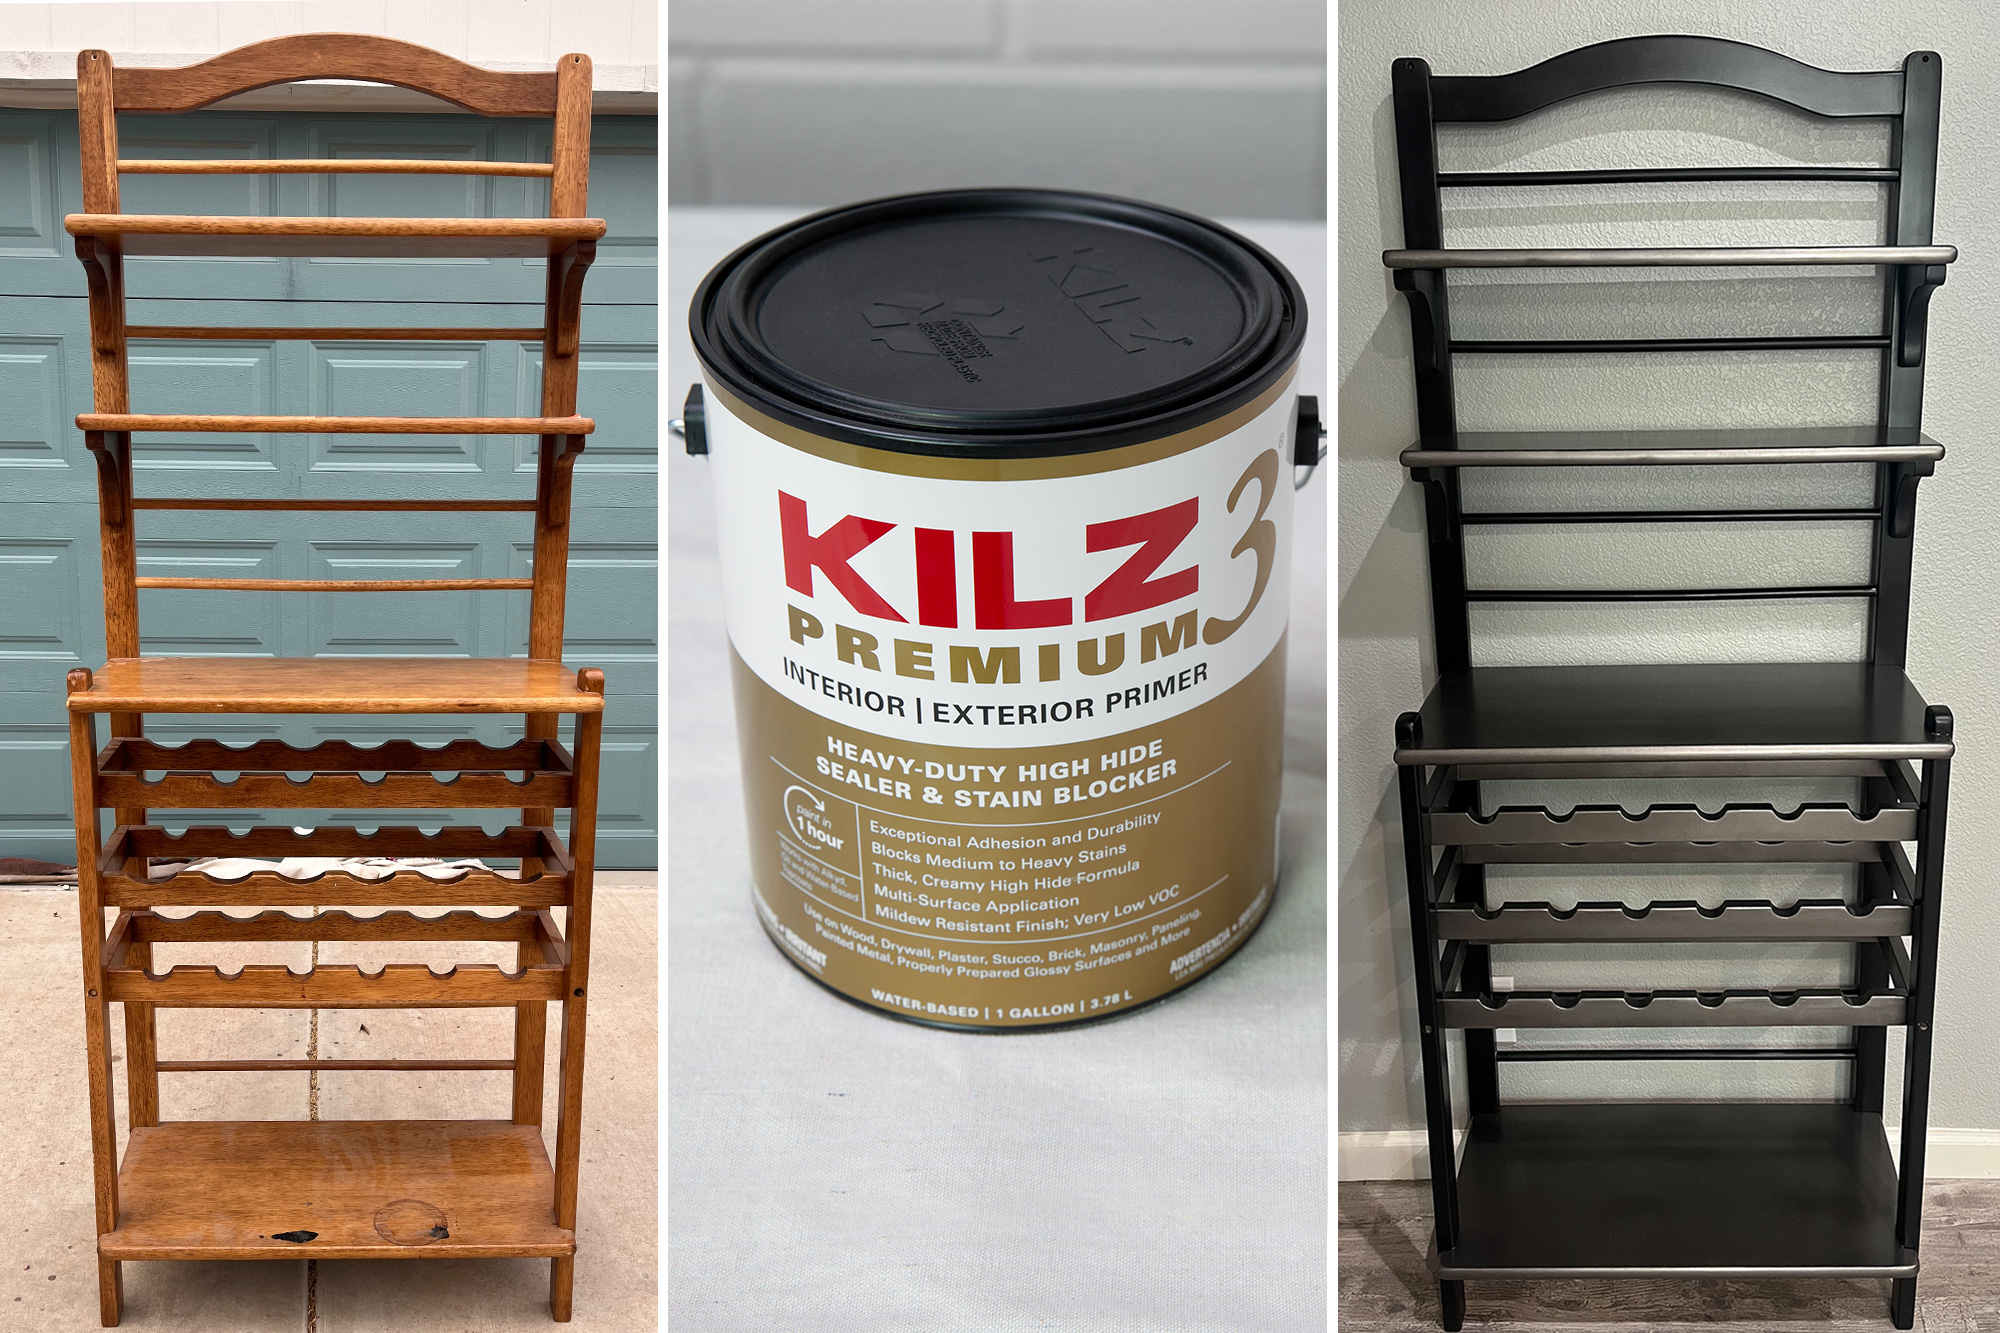 Before and after images of a wine rack using KILZ 3 Premium primer.